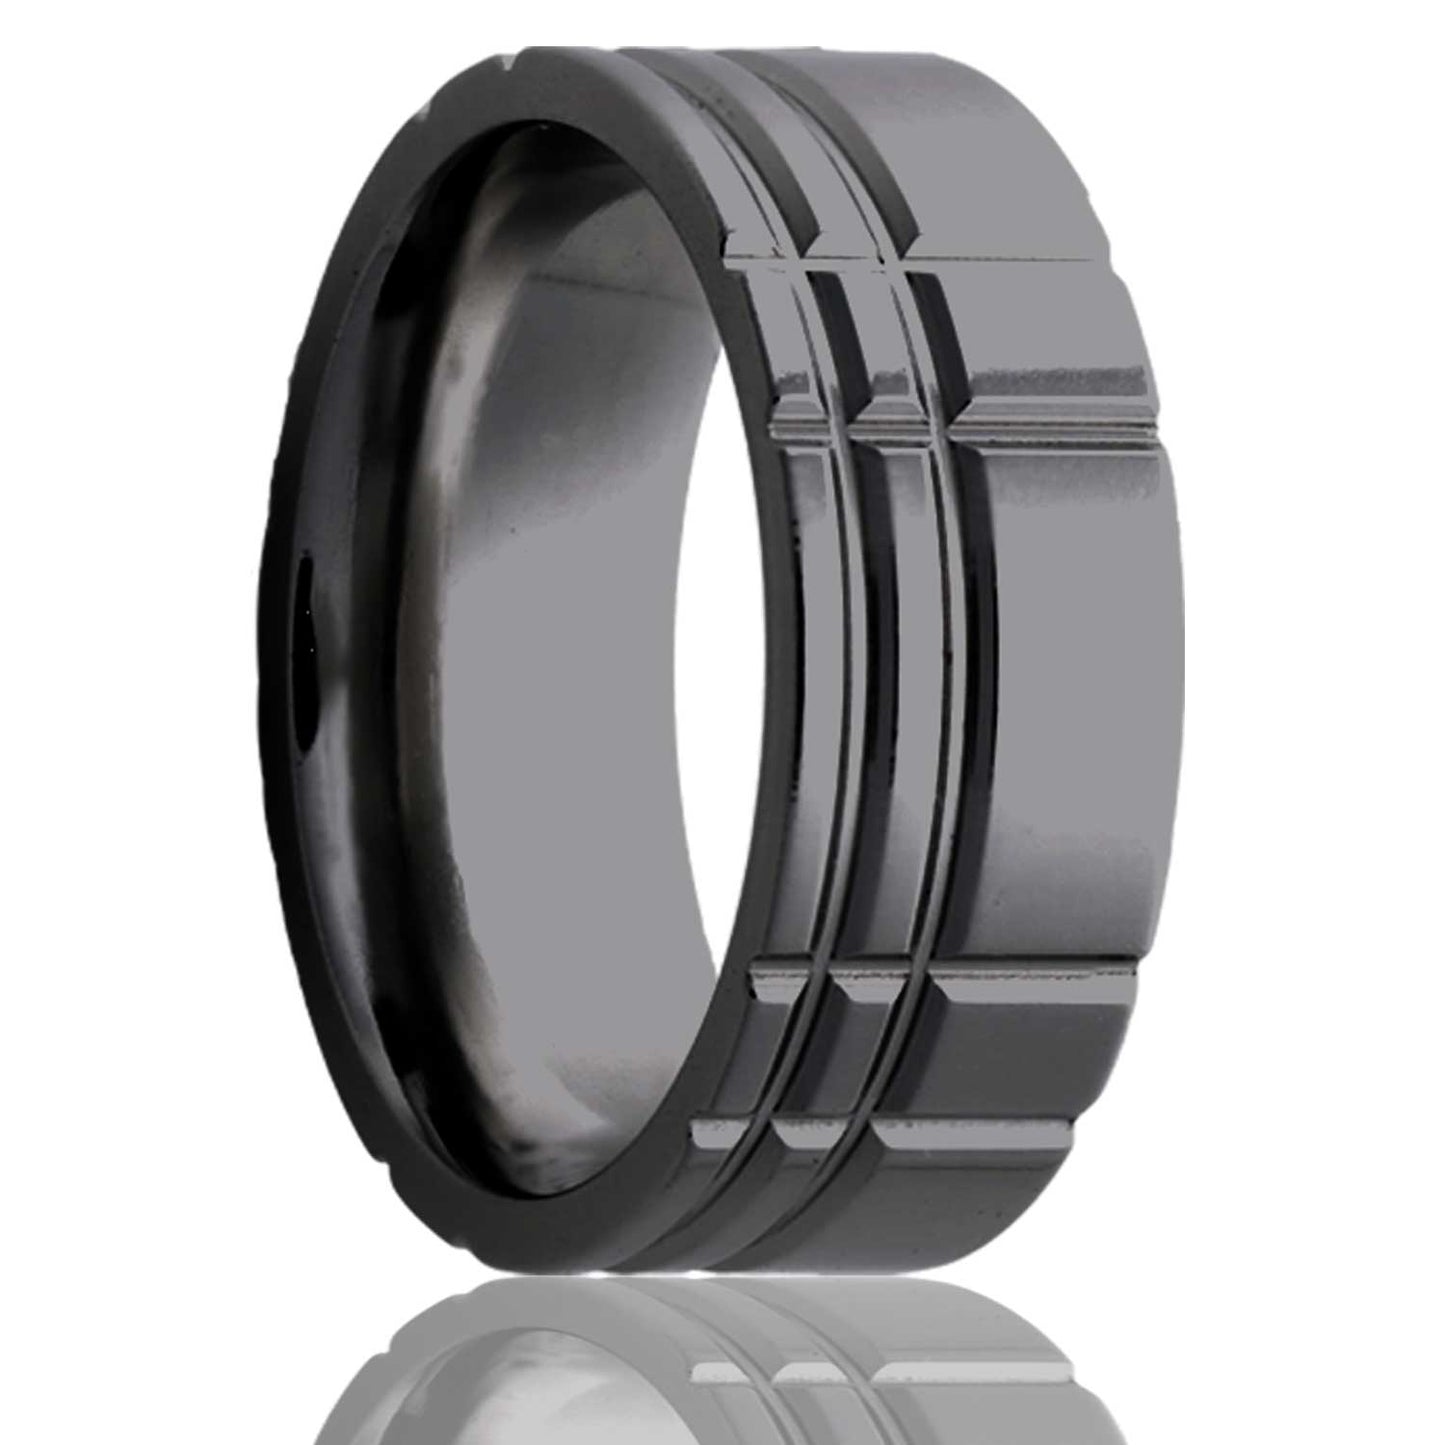 A asymmetrical intersecting grooves zirconium men's wedding band displayed on a neutral white background.